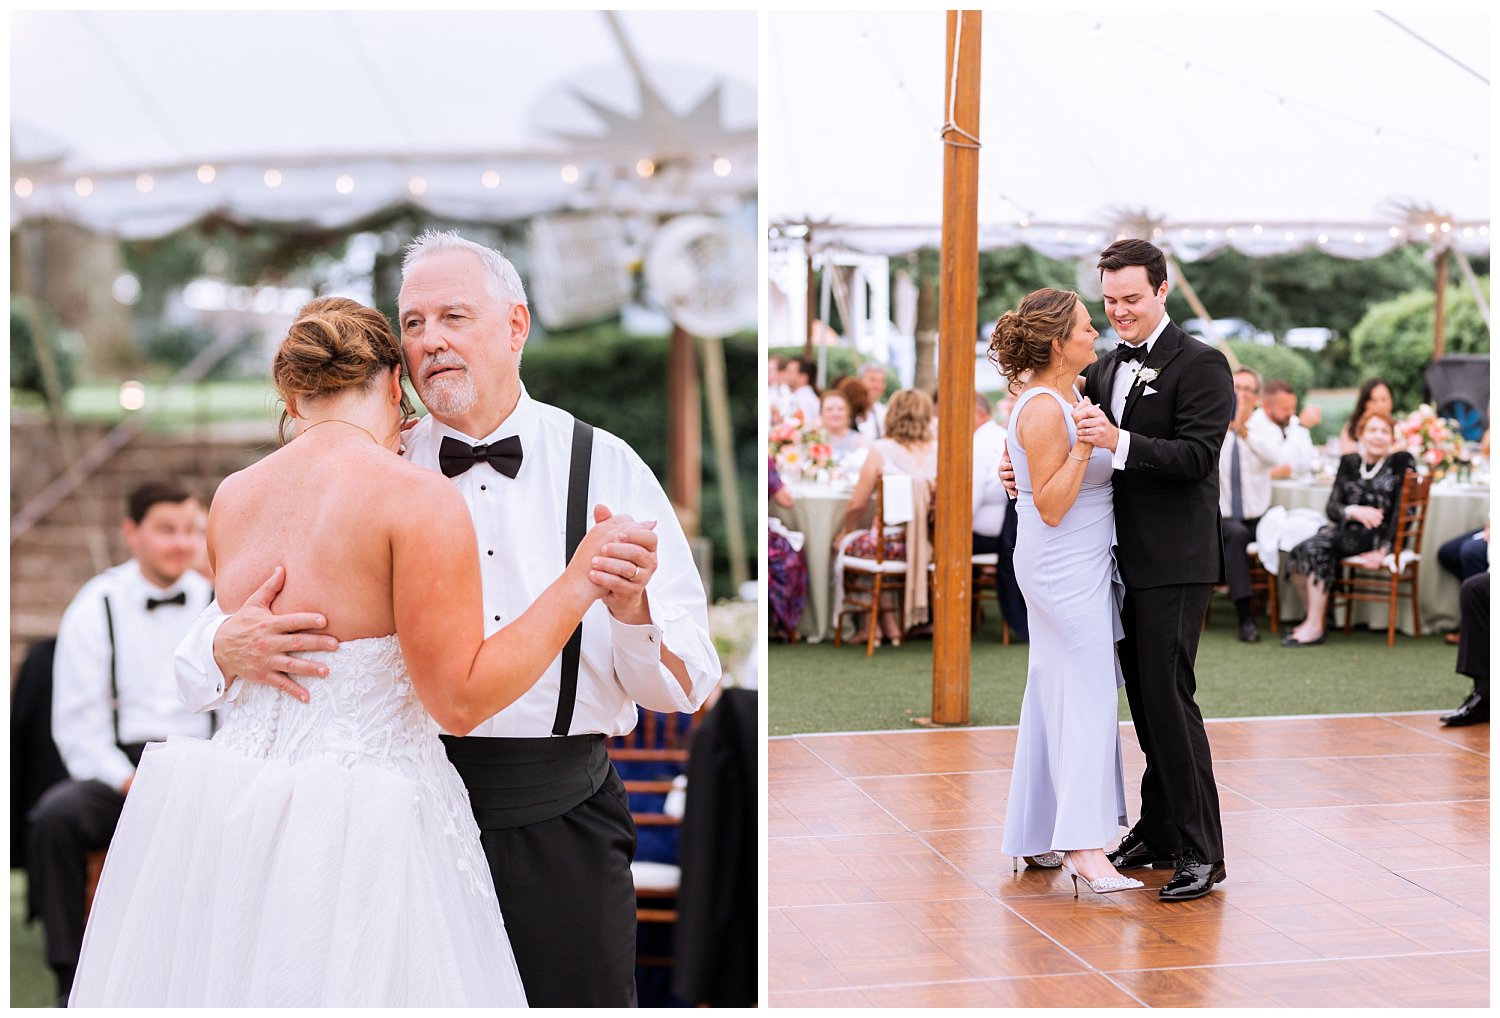 Parent dances at colorful summer wedding in Charlottesville, Virginia